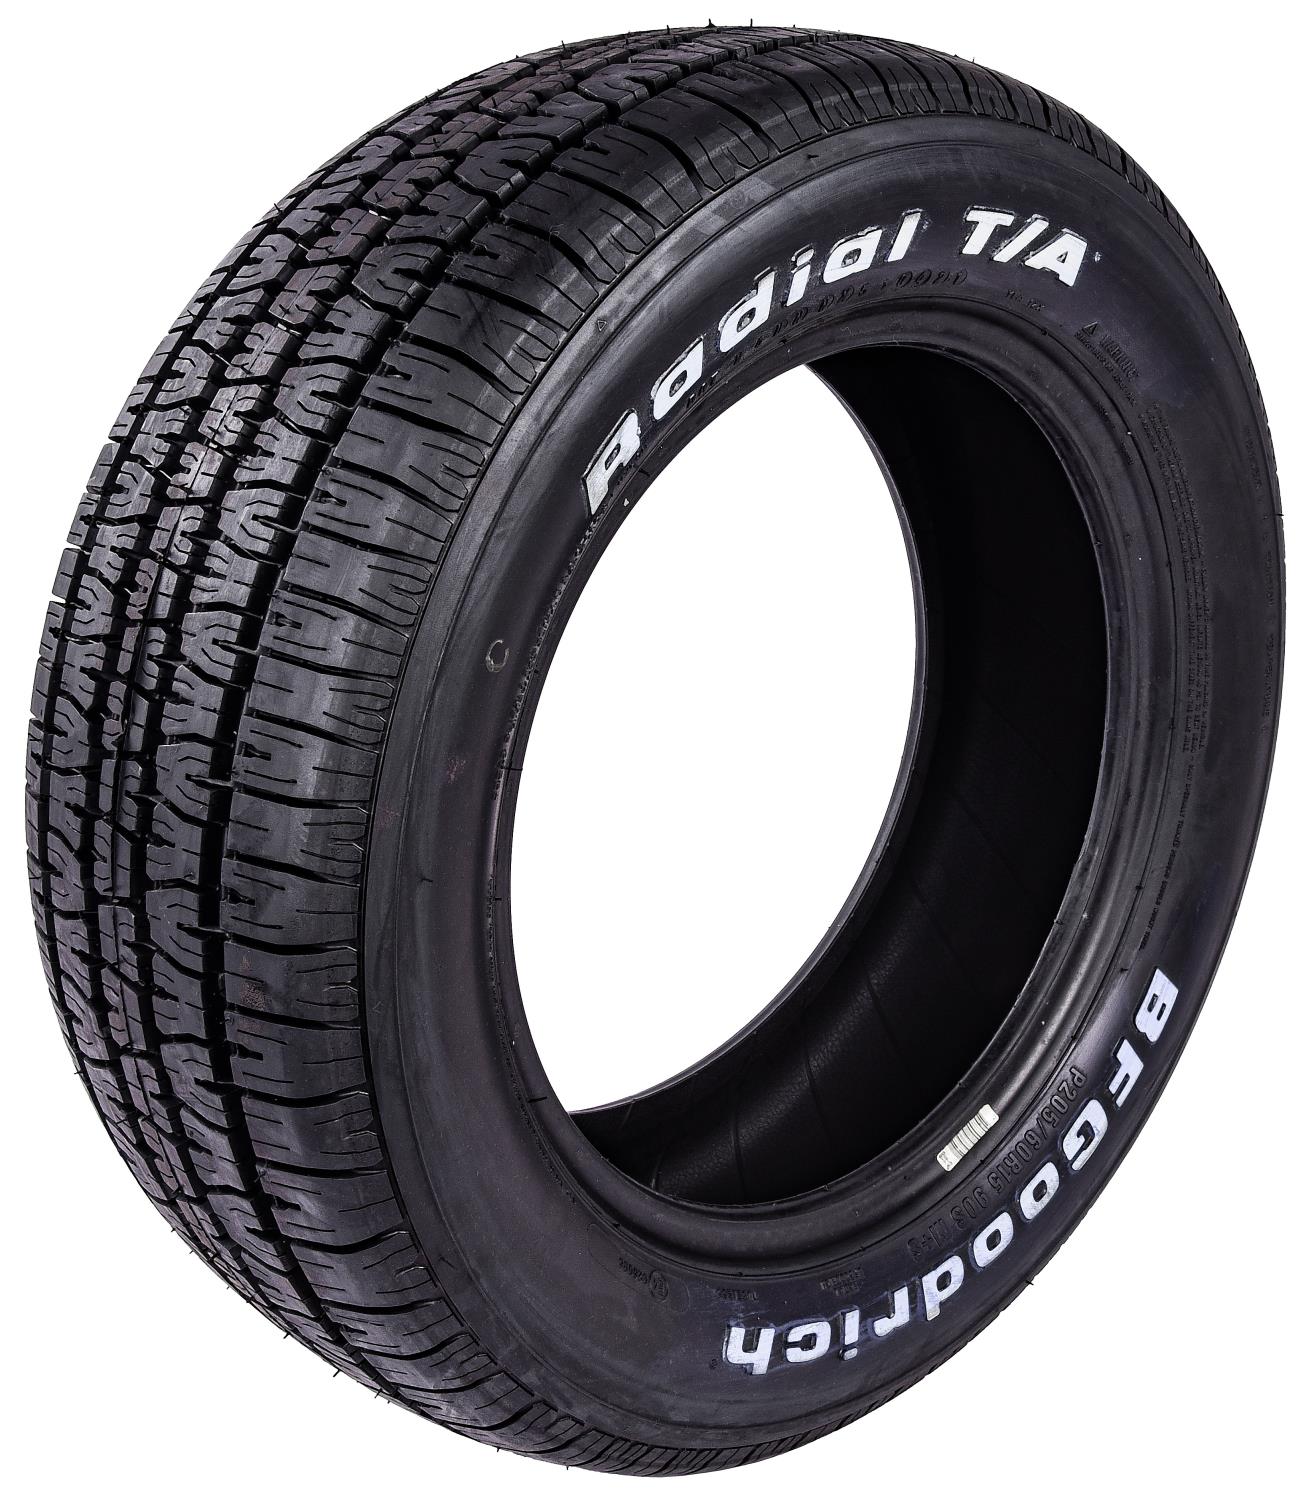 Radial T/A Tire P205/60R15